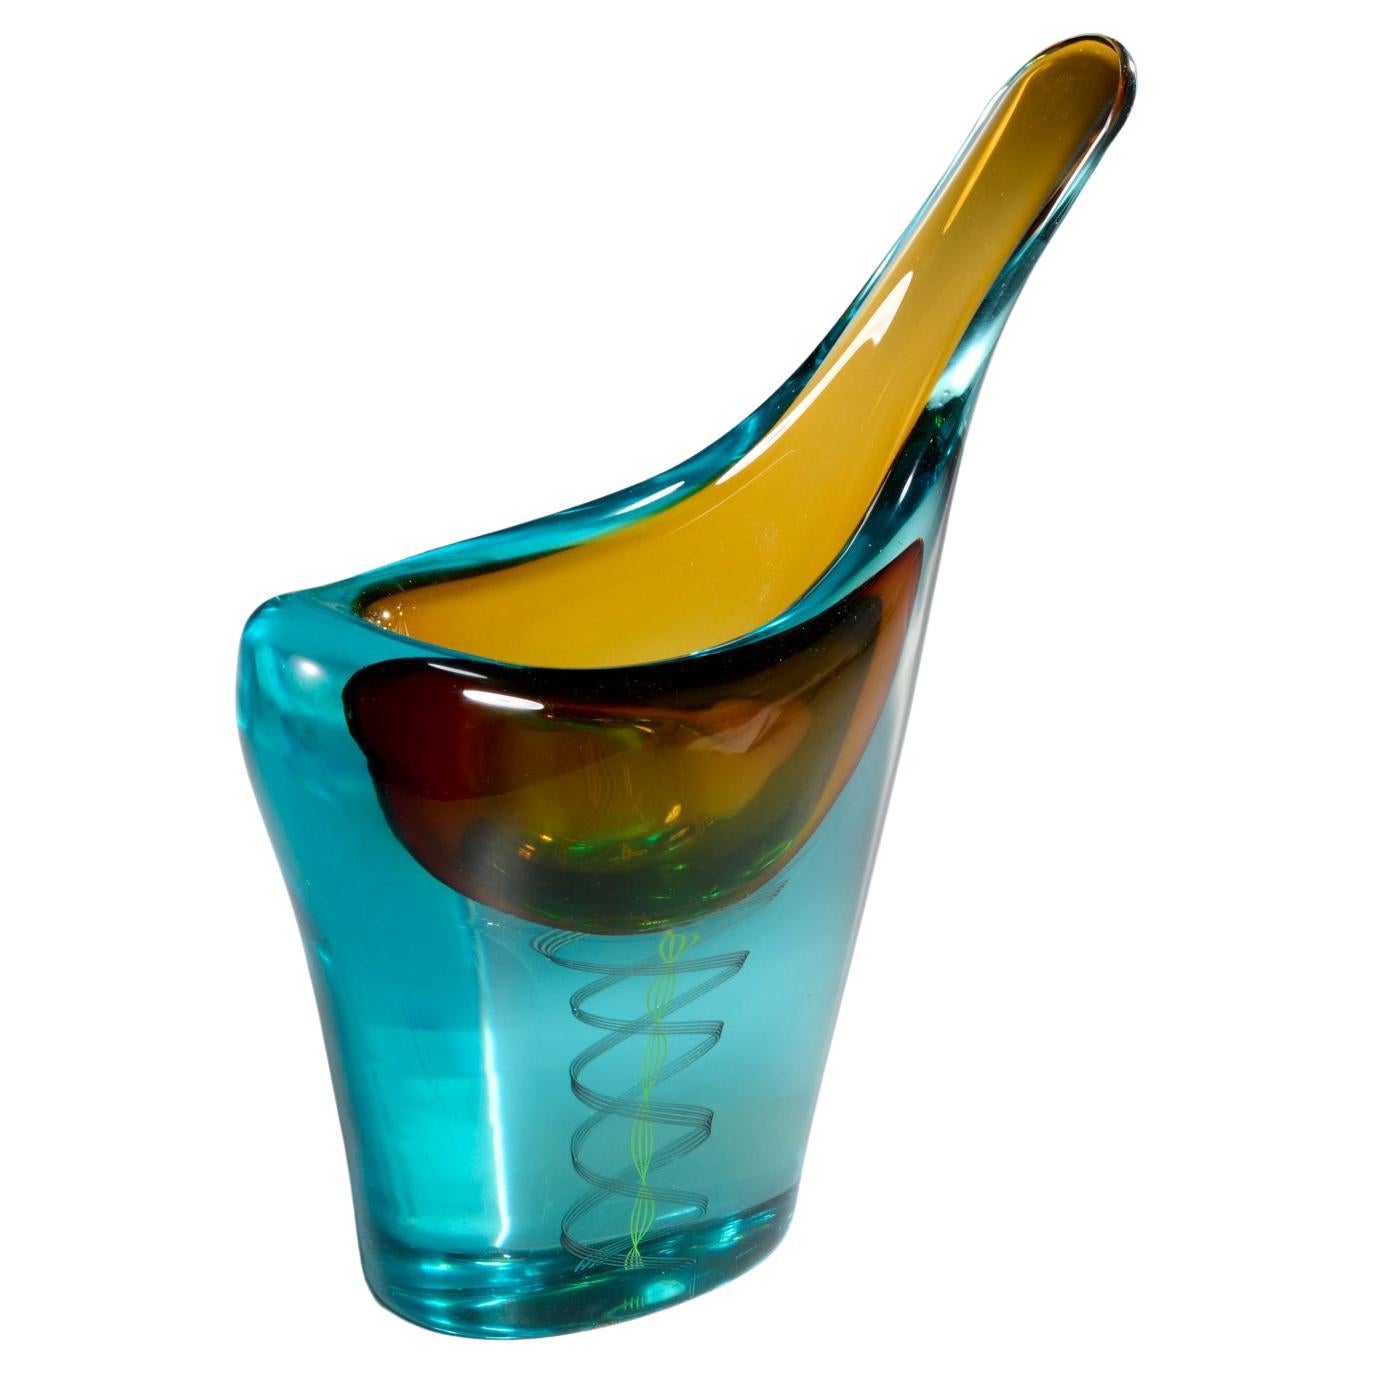 Yellow and Blue summerso glass by Luciano Gaspari for Salviati Pinnacolo